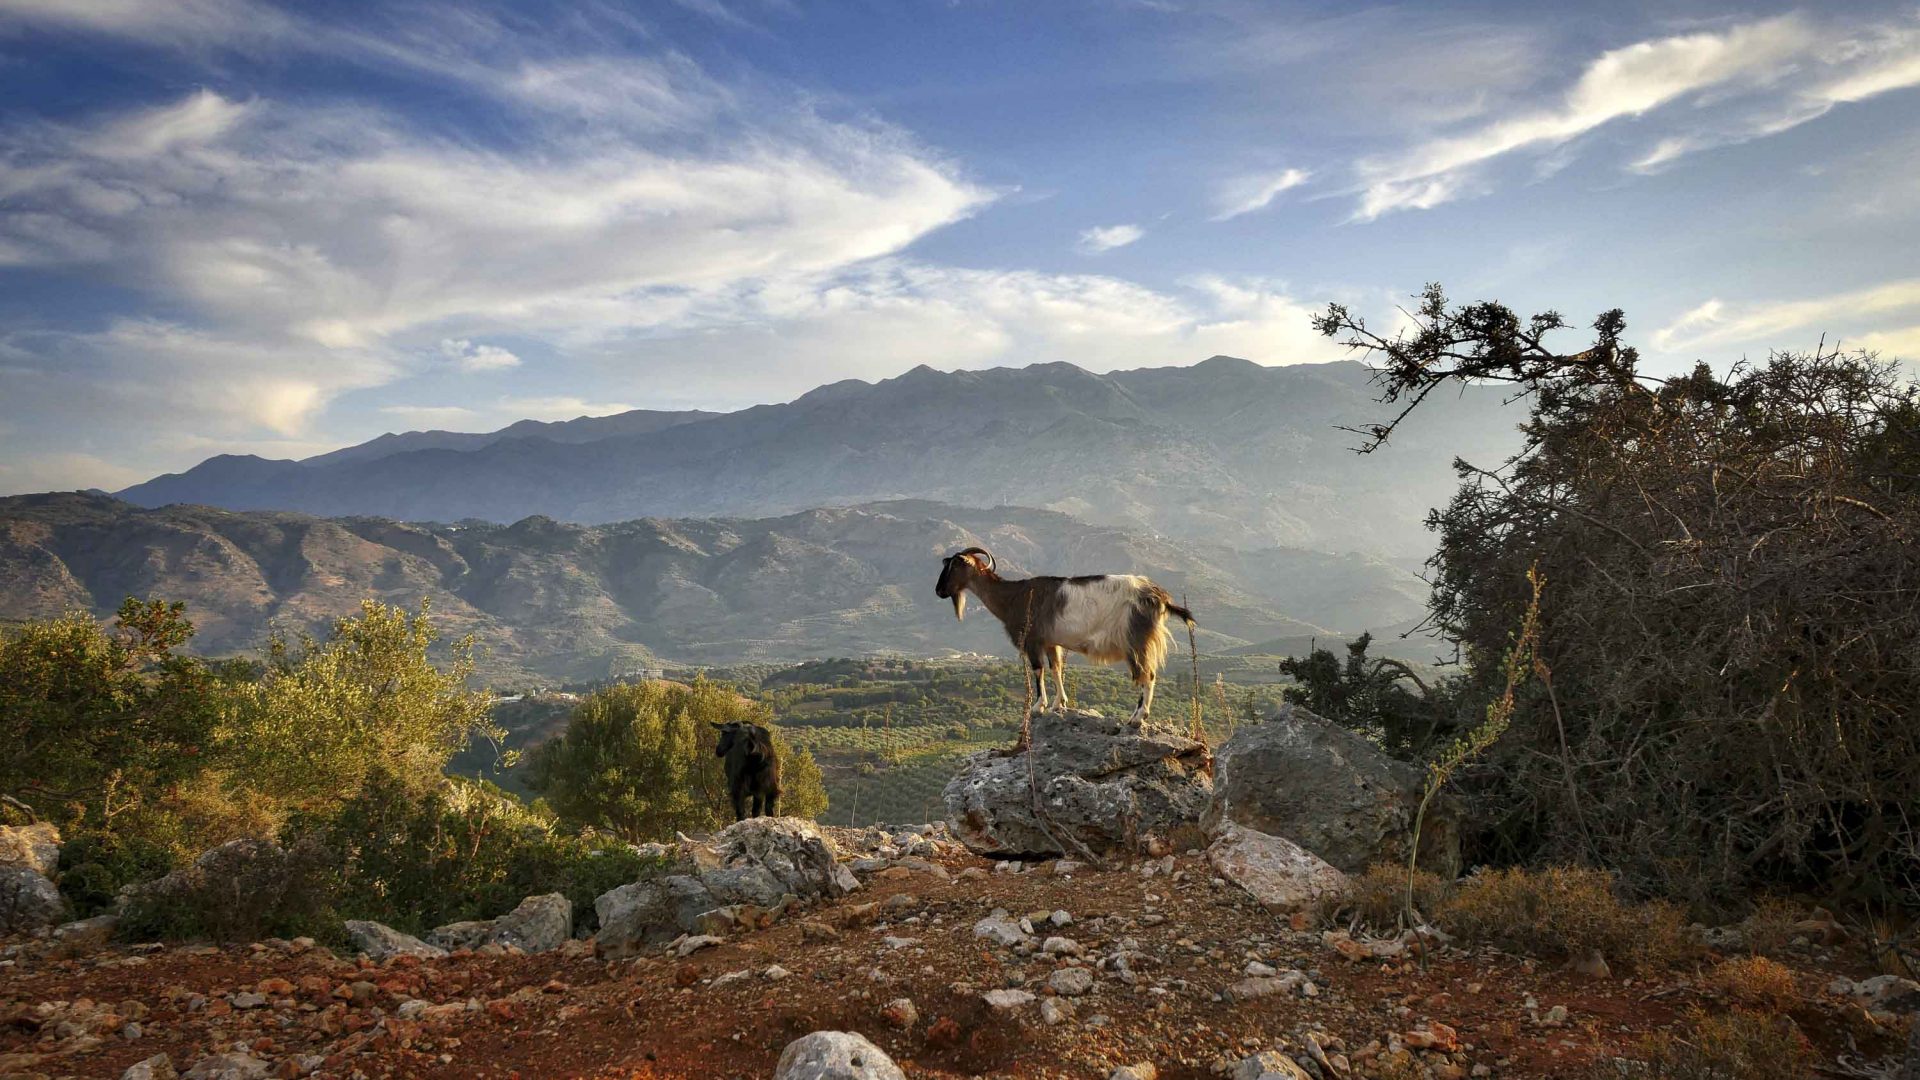 A goat stands on a hill overlooking a valley.